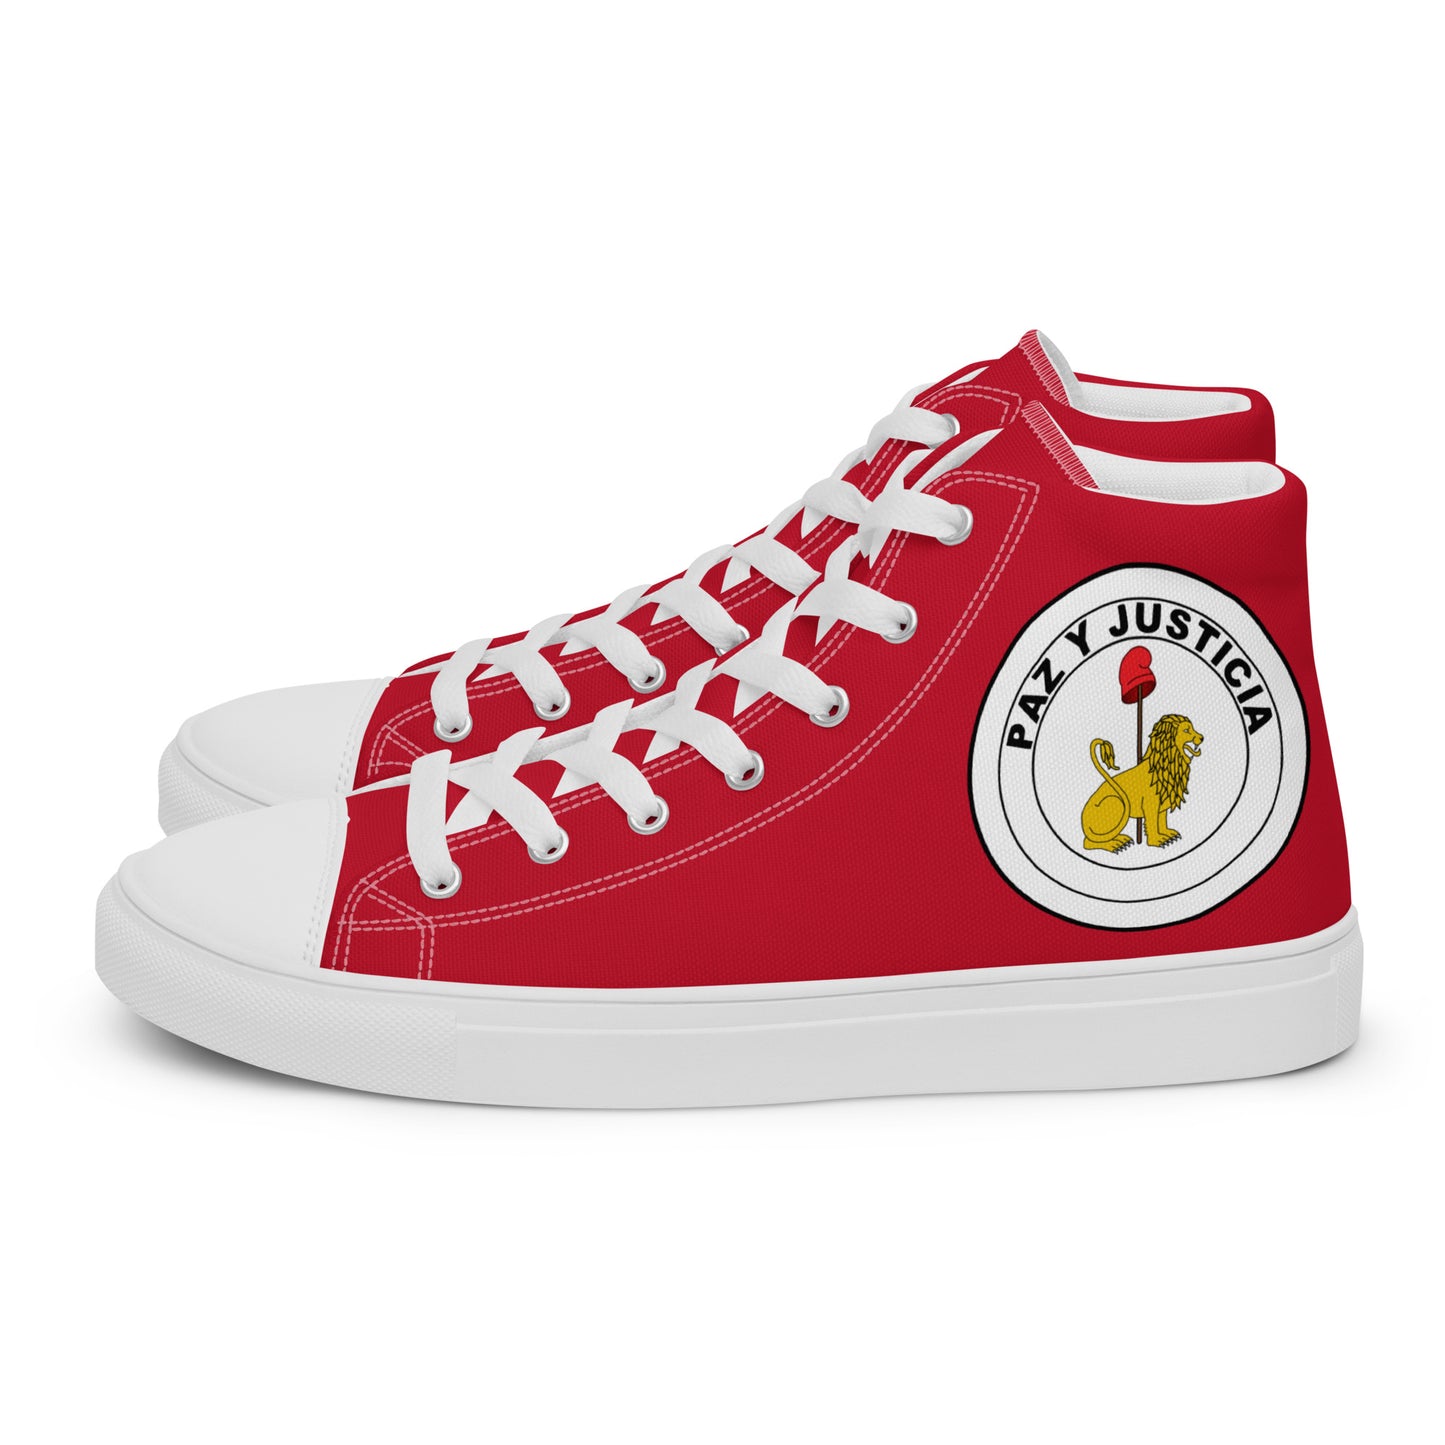 Paraguay - Women - Red - High top shoes